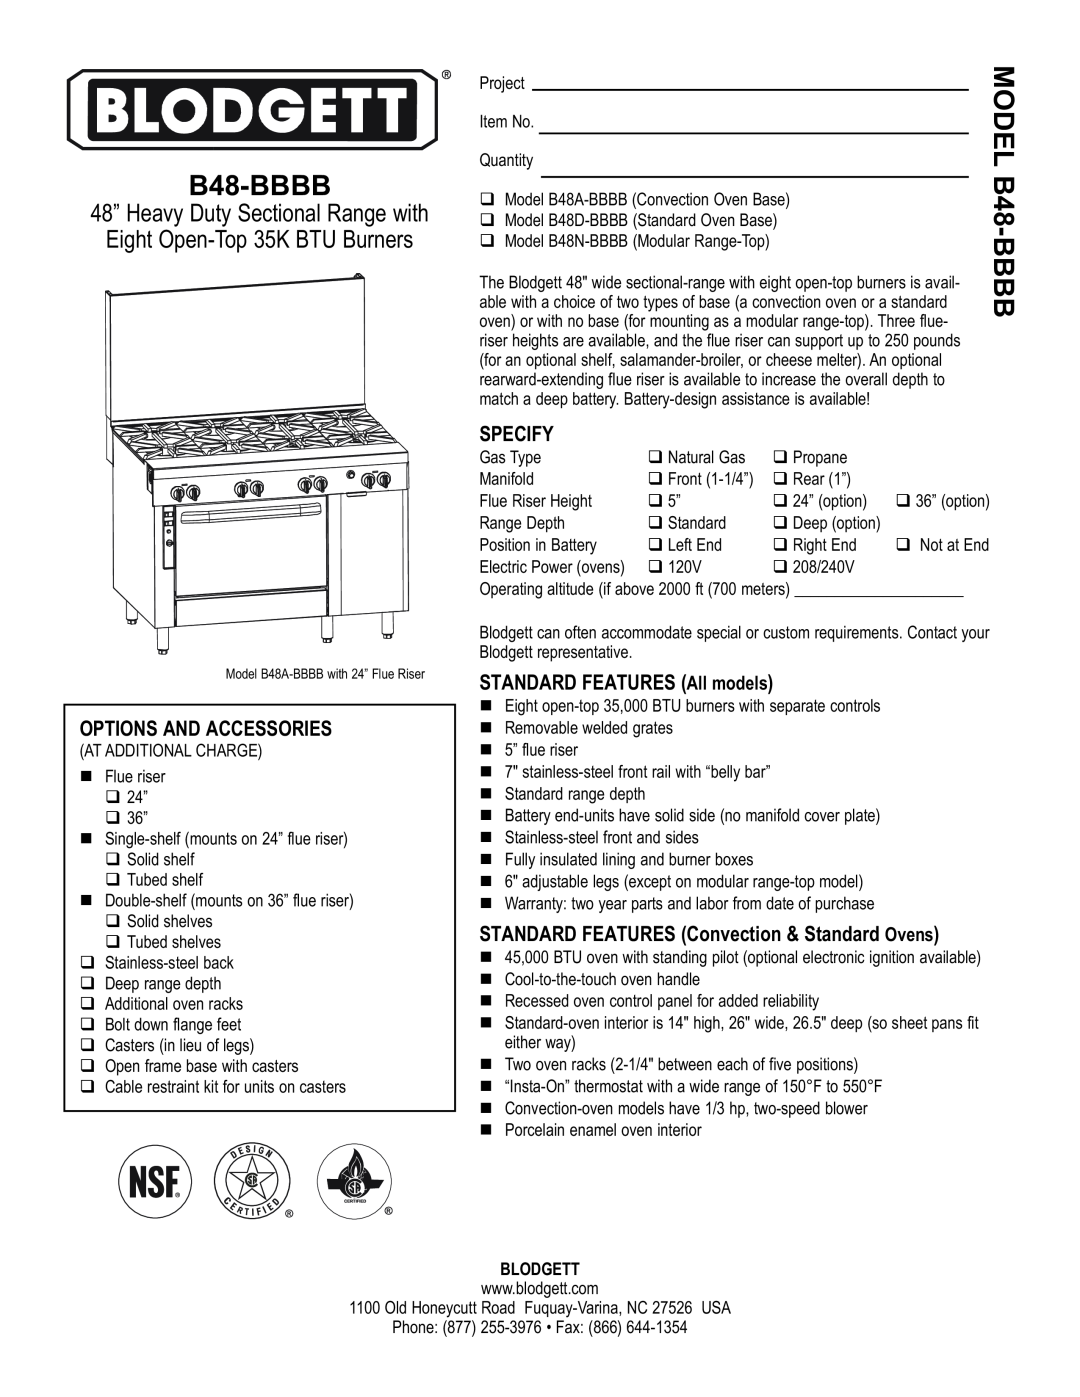 Blodgett B48-BBBB warranty Options And Accessories, Specify, STANDARD FEATURES All models, Blodgett, Bbbb 